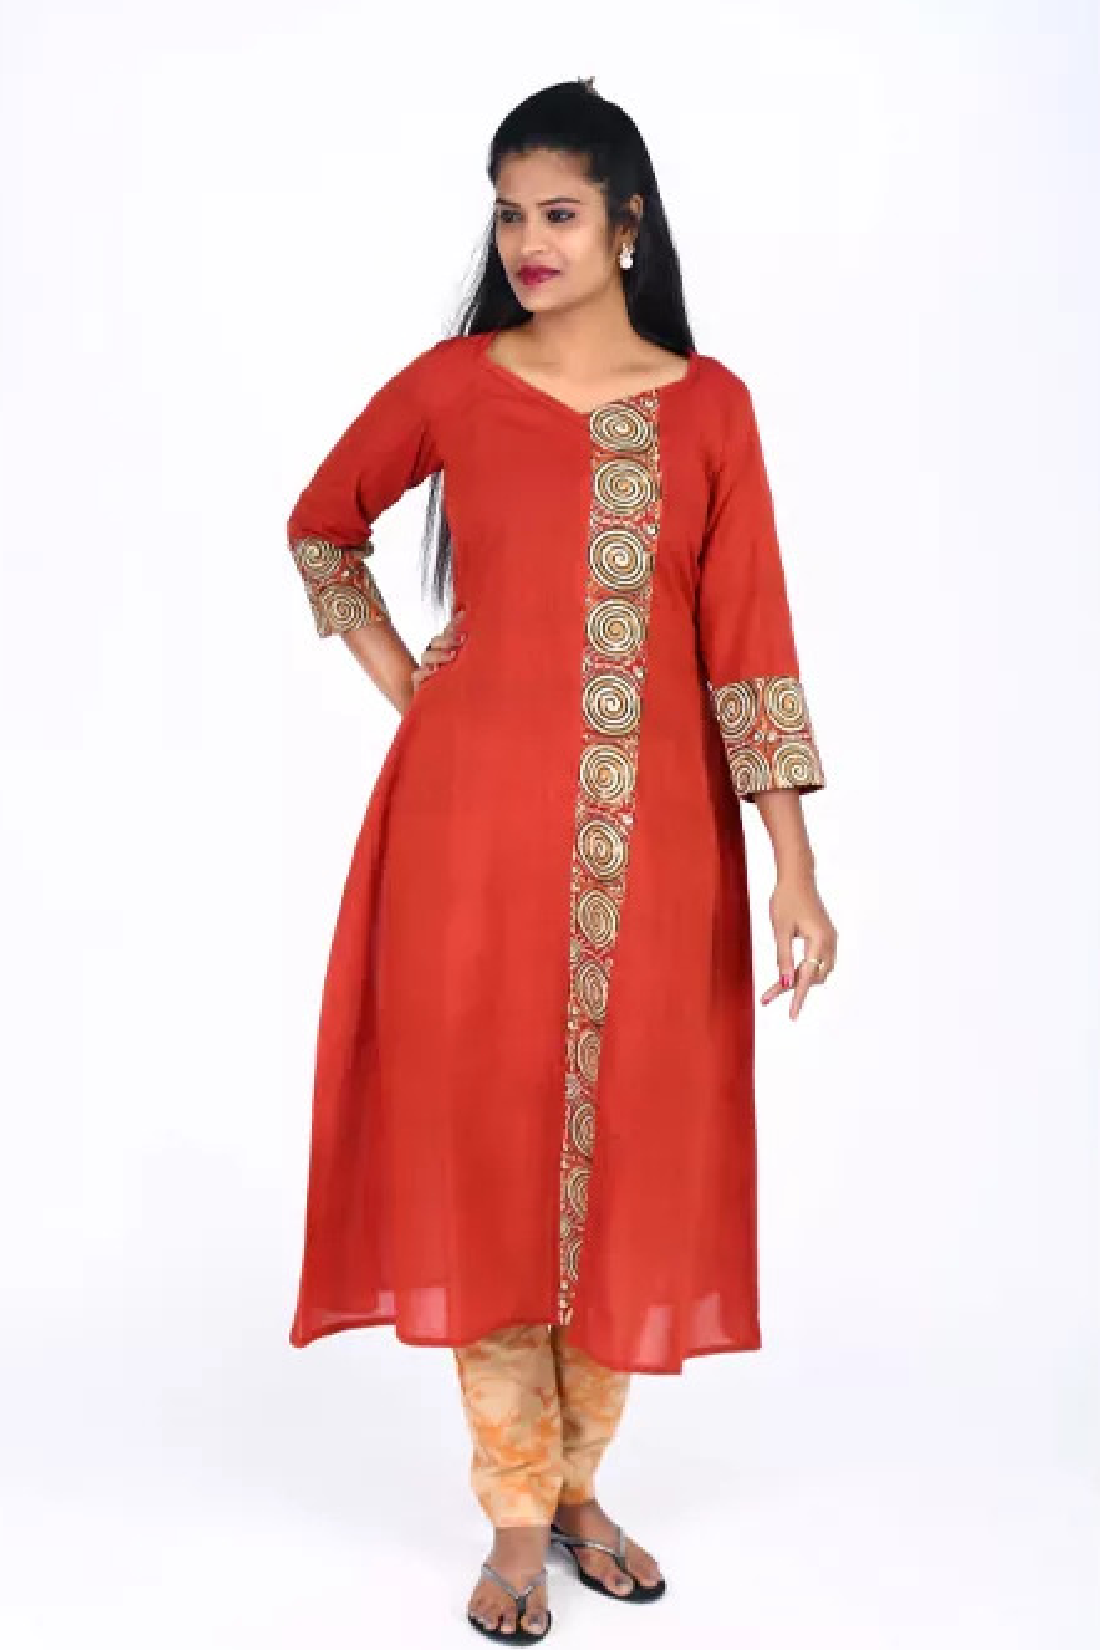 Amazon.com: Indian Selections - Rust colored viscose Kurti with net sleeves  and half body neckline and collar. - Medium : Clothing, Shoes & Jewelry